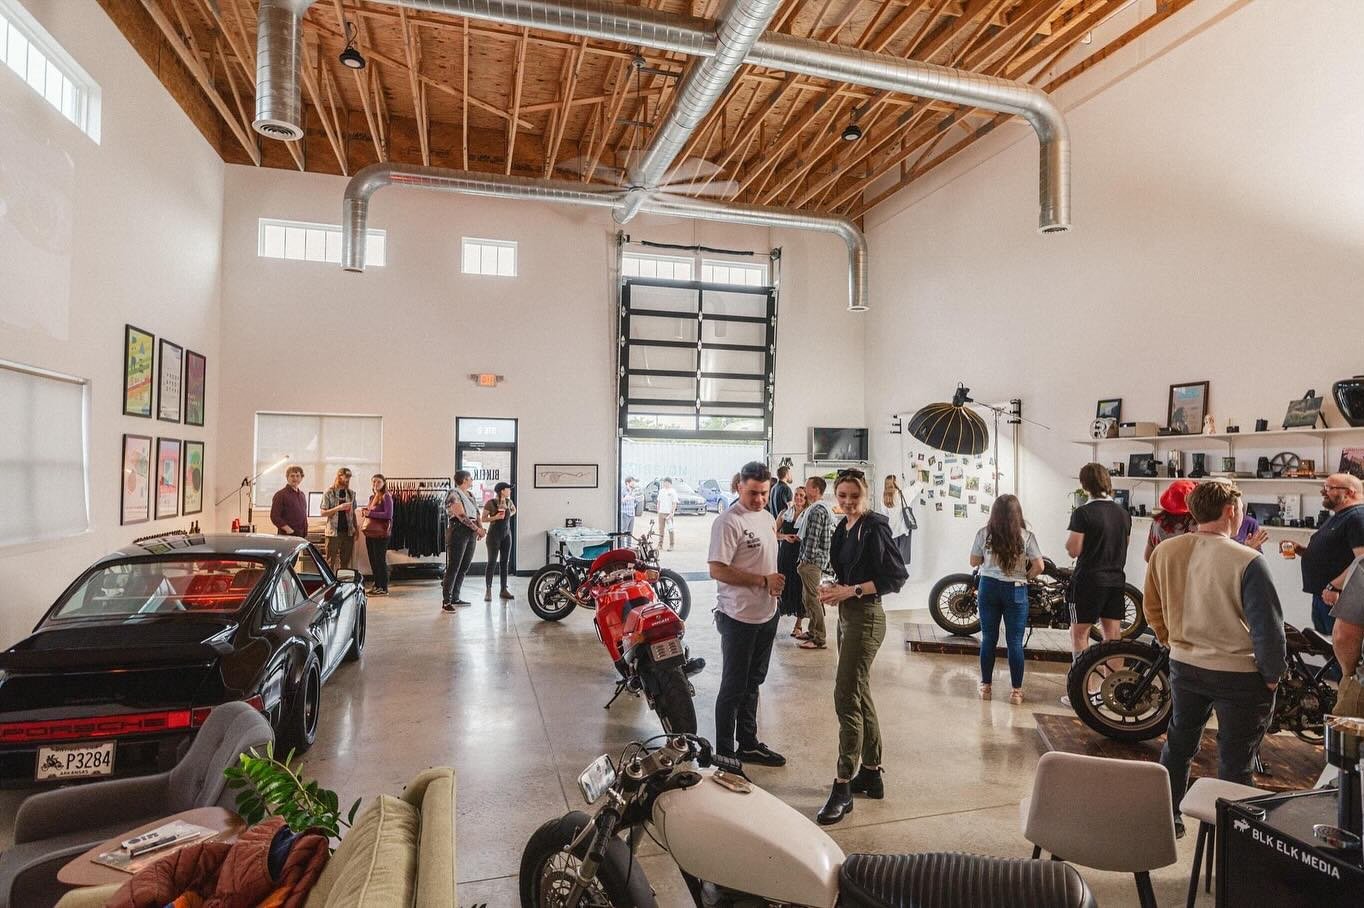 Good times at the Art in Motion Gallery Show at @blkelkmedia HQ over the weekend! Thanks to @oneup_motogarage and @blkelkmedia for teaming up with us for this unique event!

📷: @blkelkmedia 

#expressrally #driversonly #blkelkmedia #oneupmotogarage 